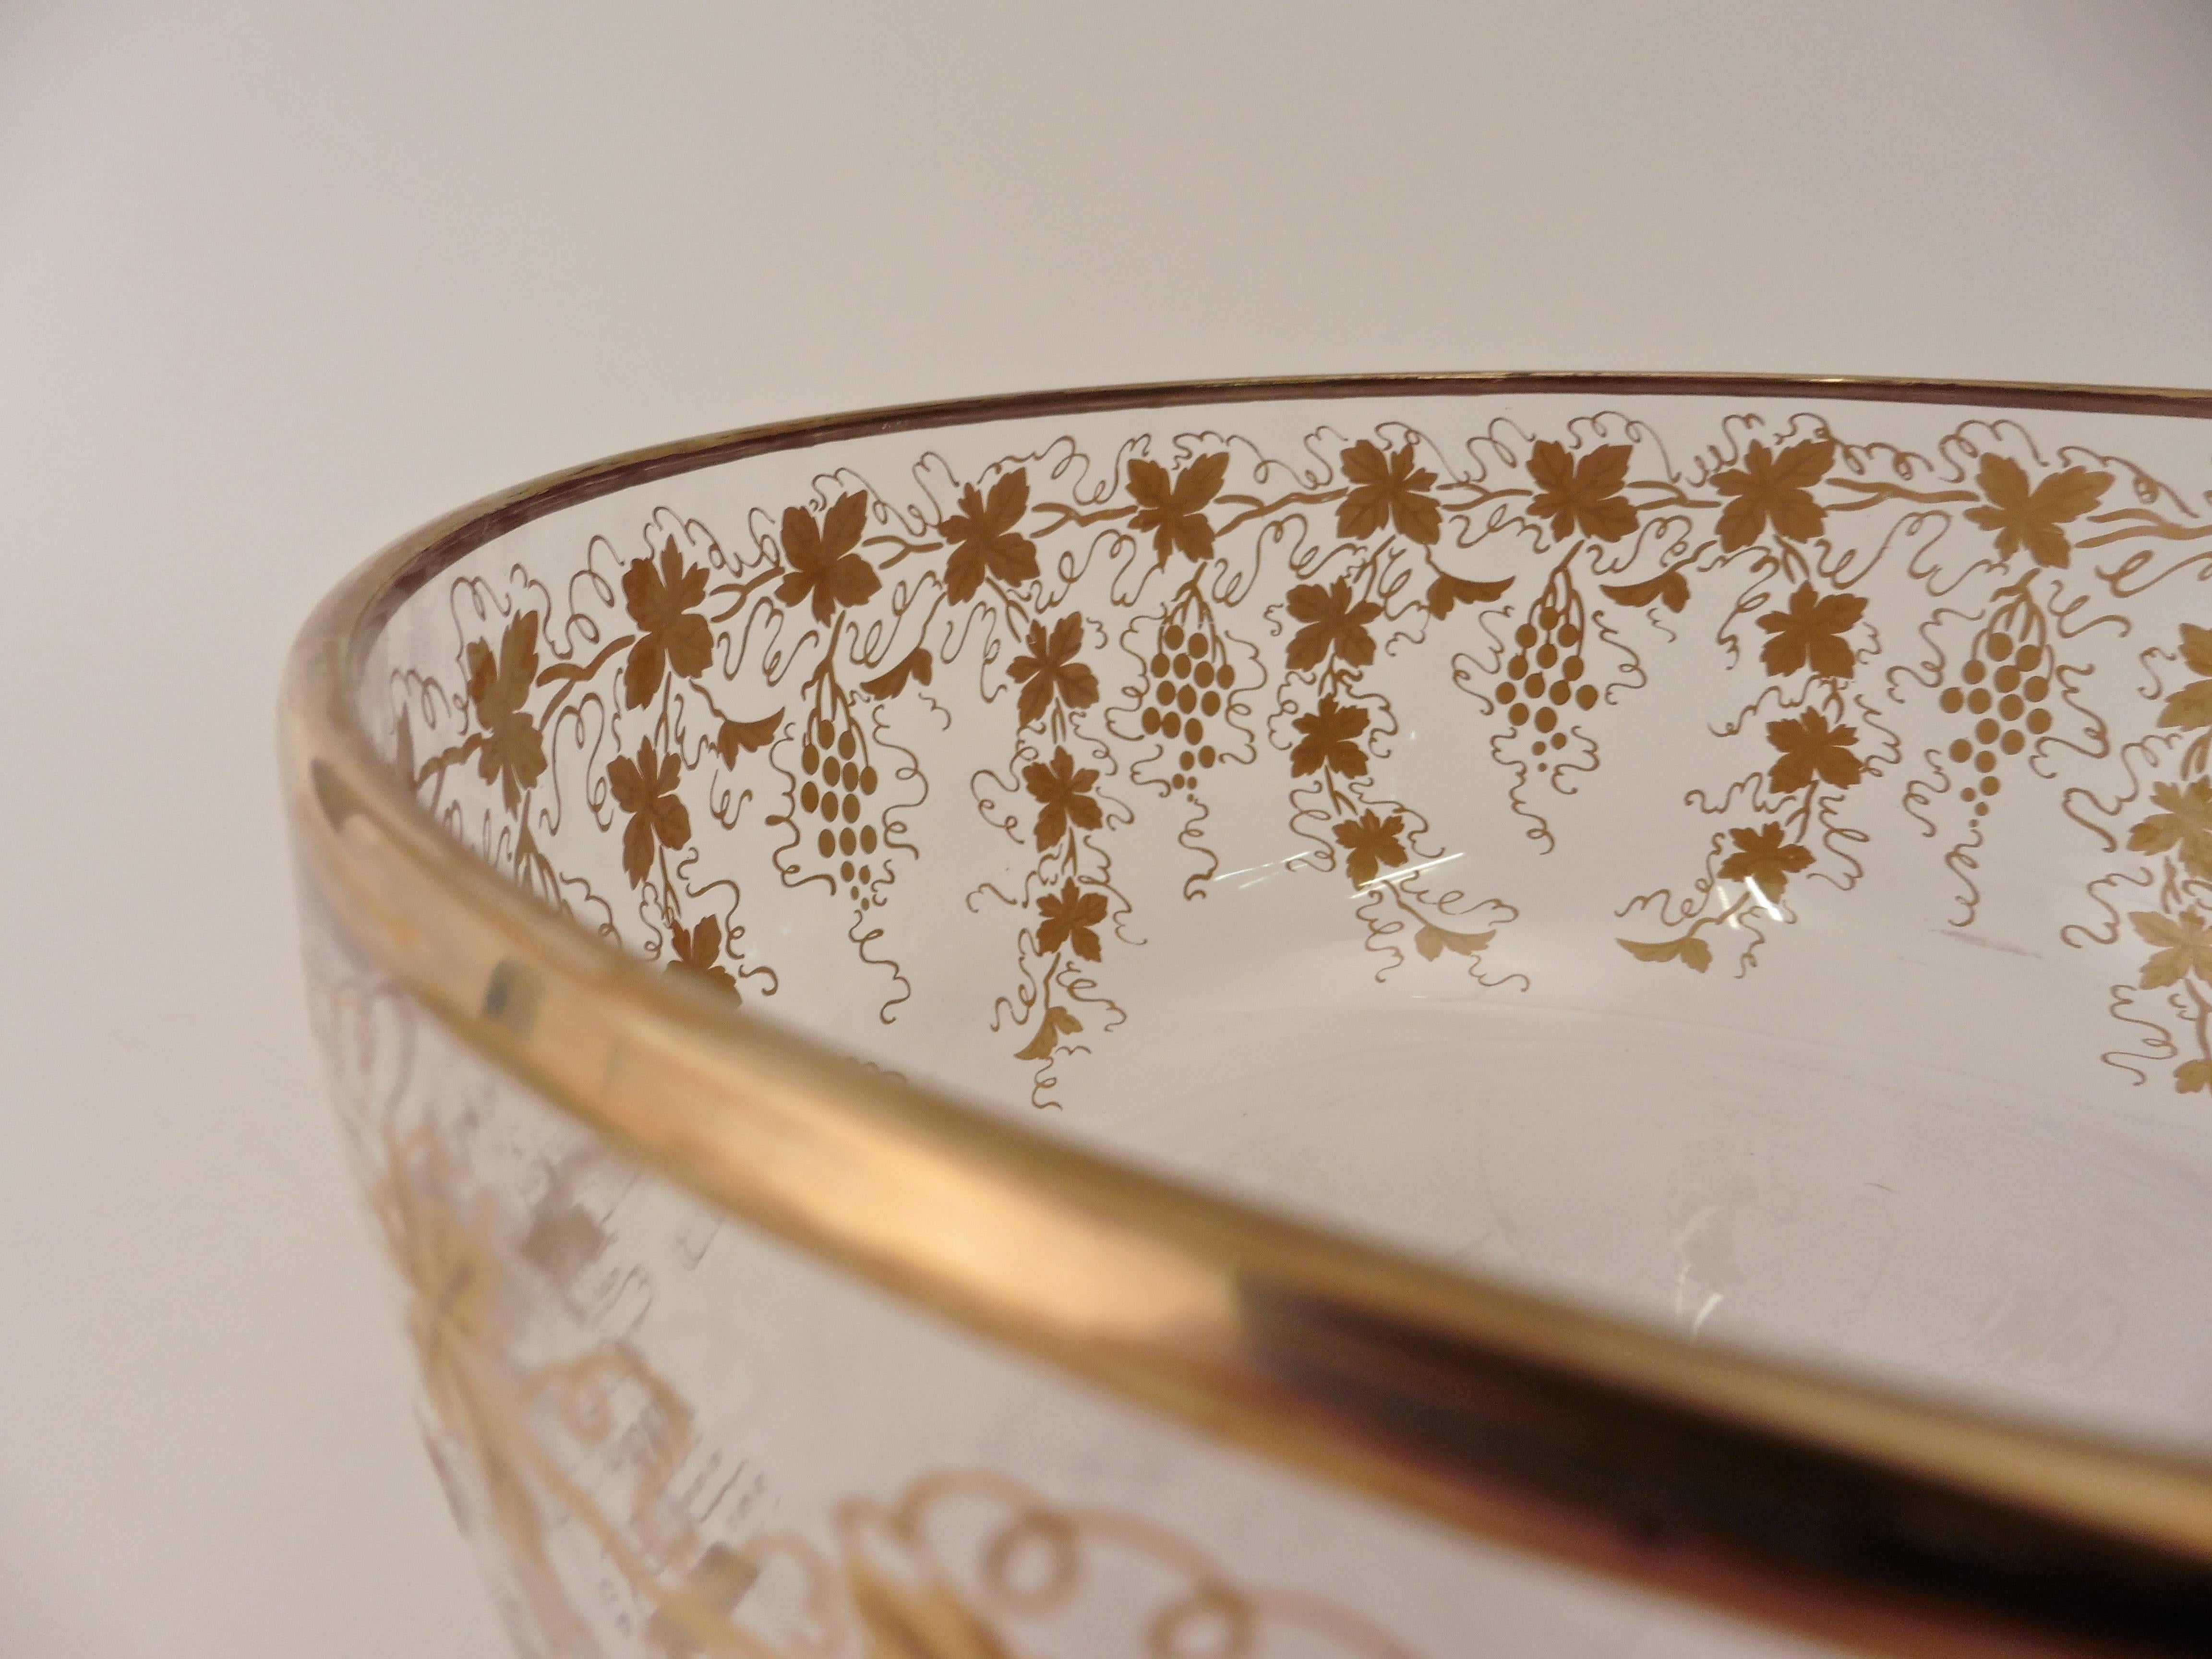 Early 20th Century Pair of English Crystal Glass Bowls with Gilt Decoration c.1910